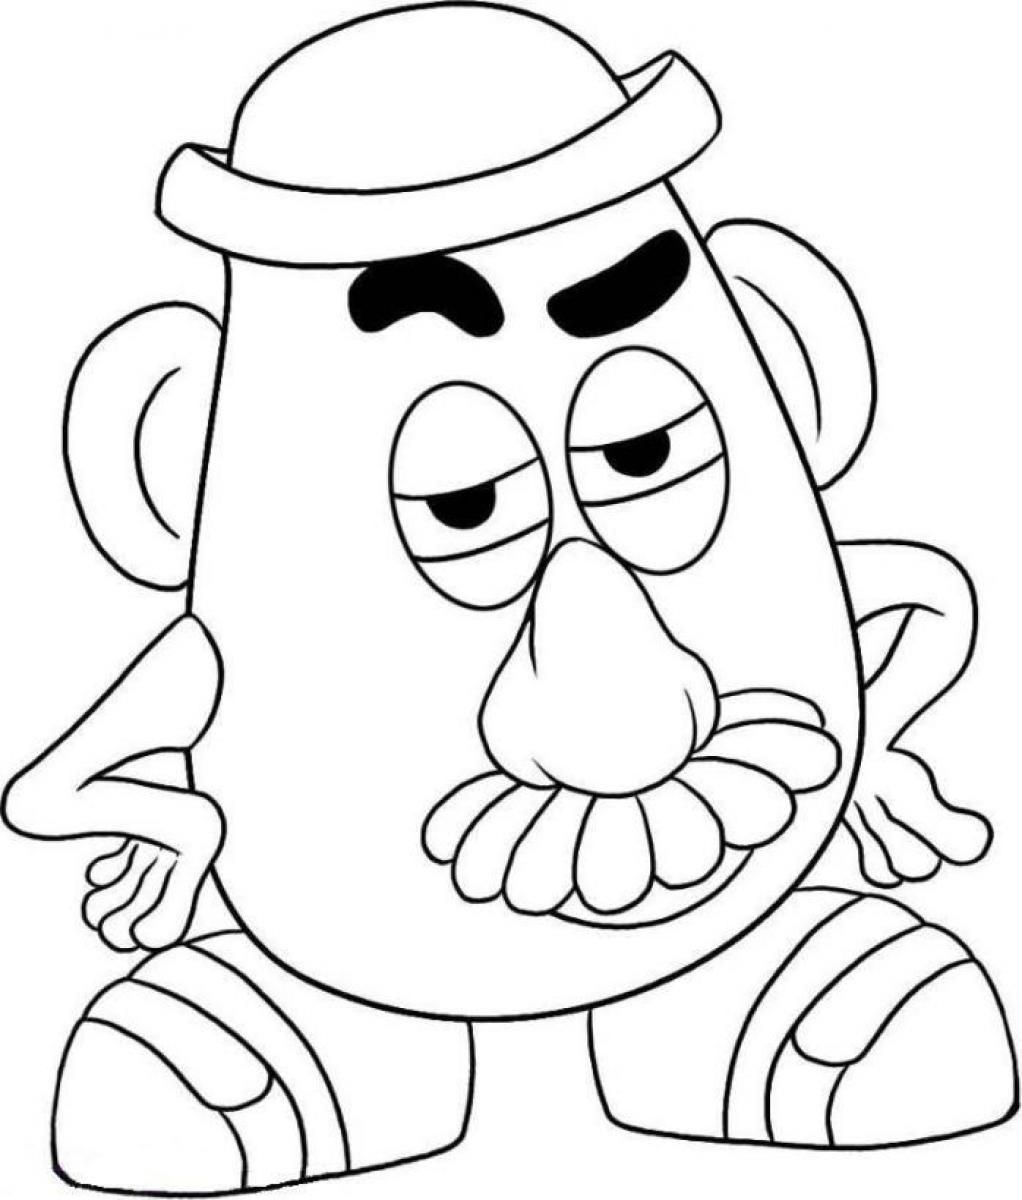 Blank Toy Story Coloring Pages - Coloring Pages For All Ages